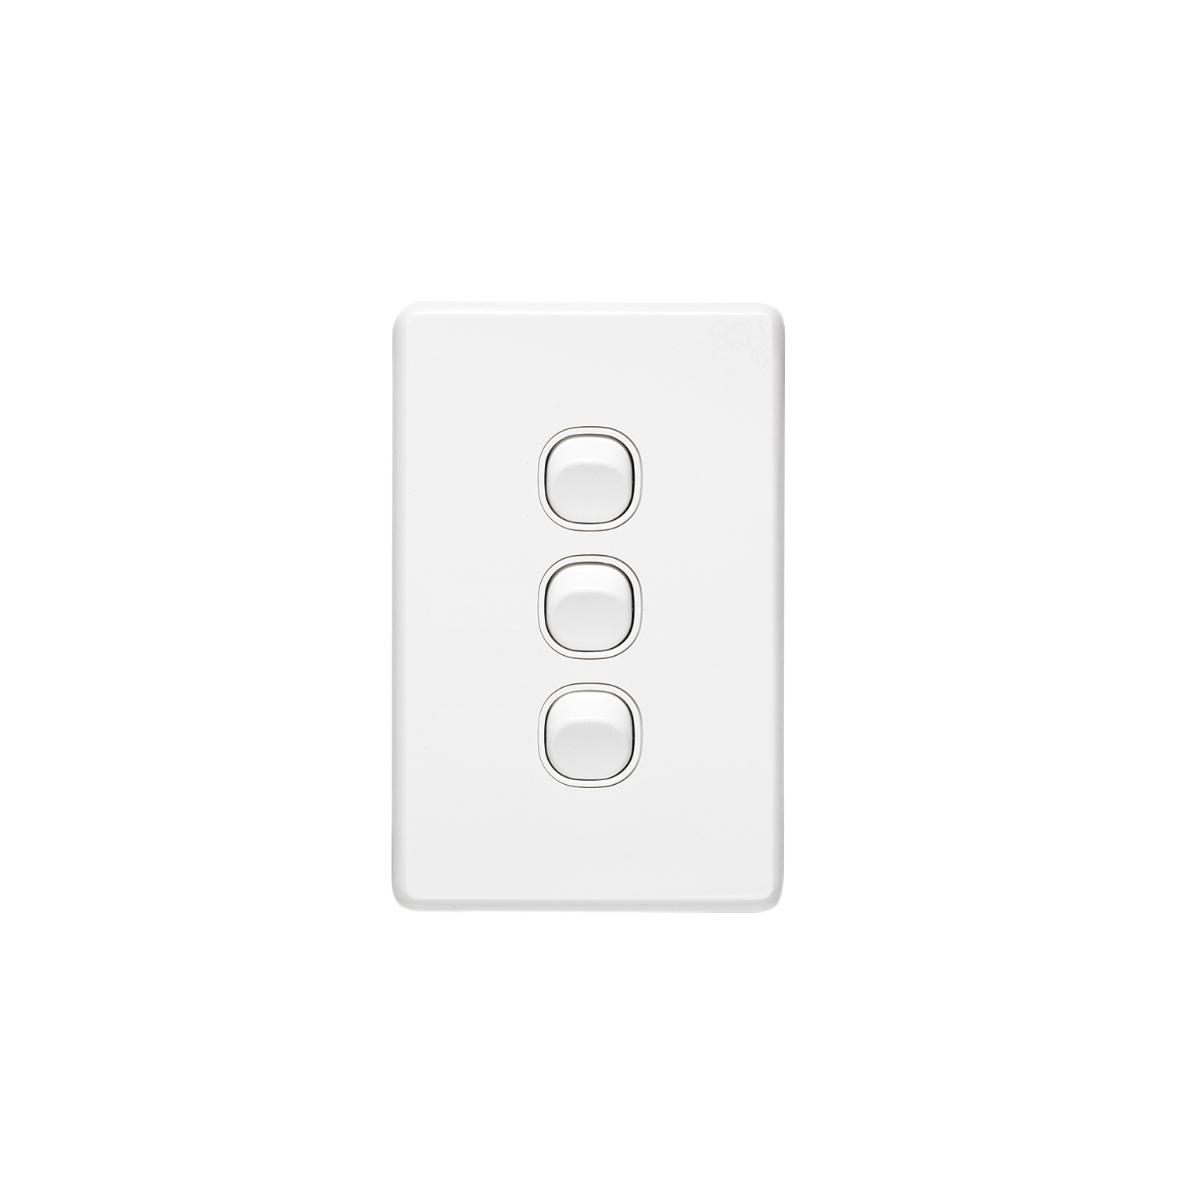 C2000 SWITCH VERTICAL 3G 10A WHITE